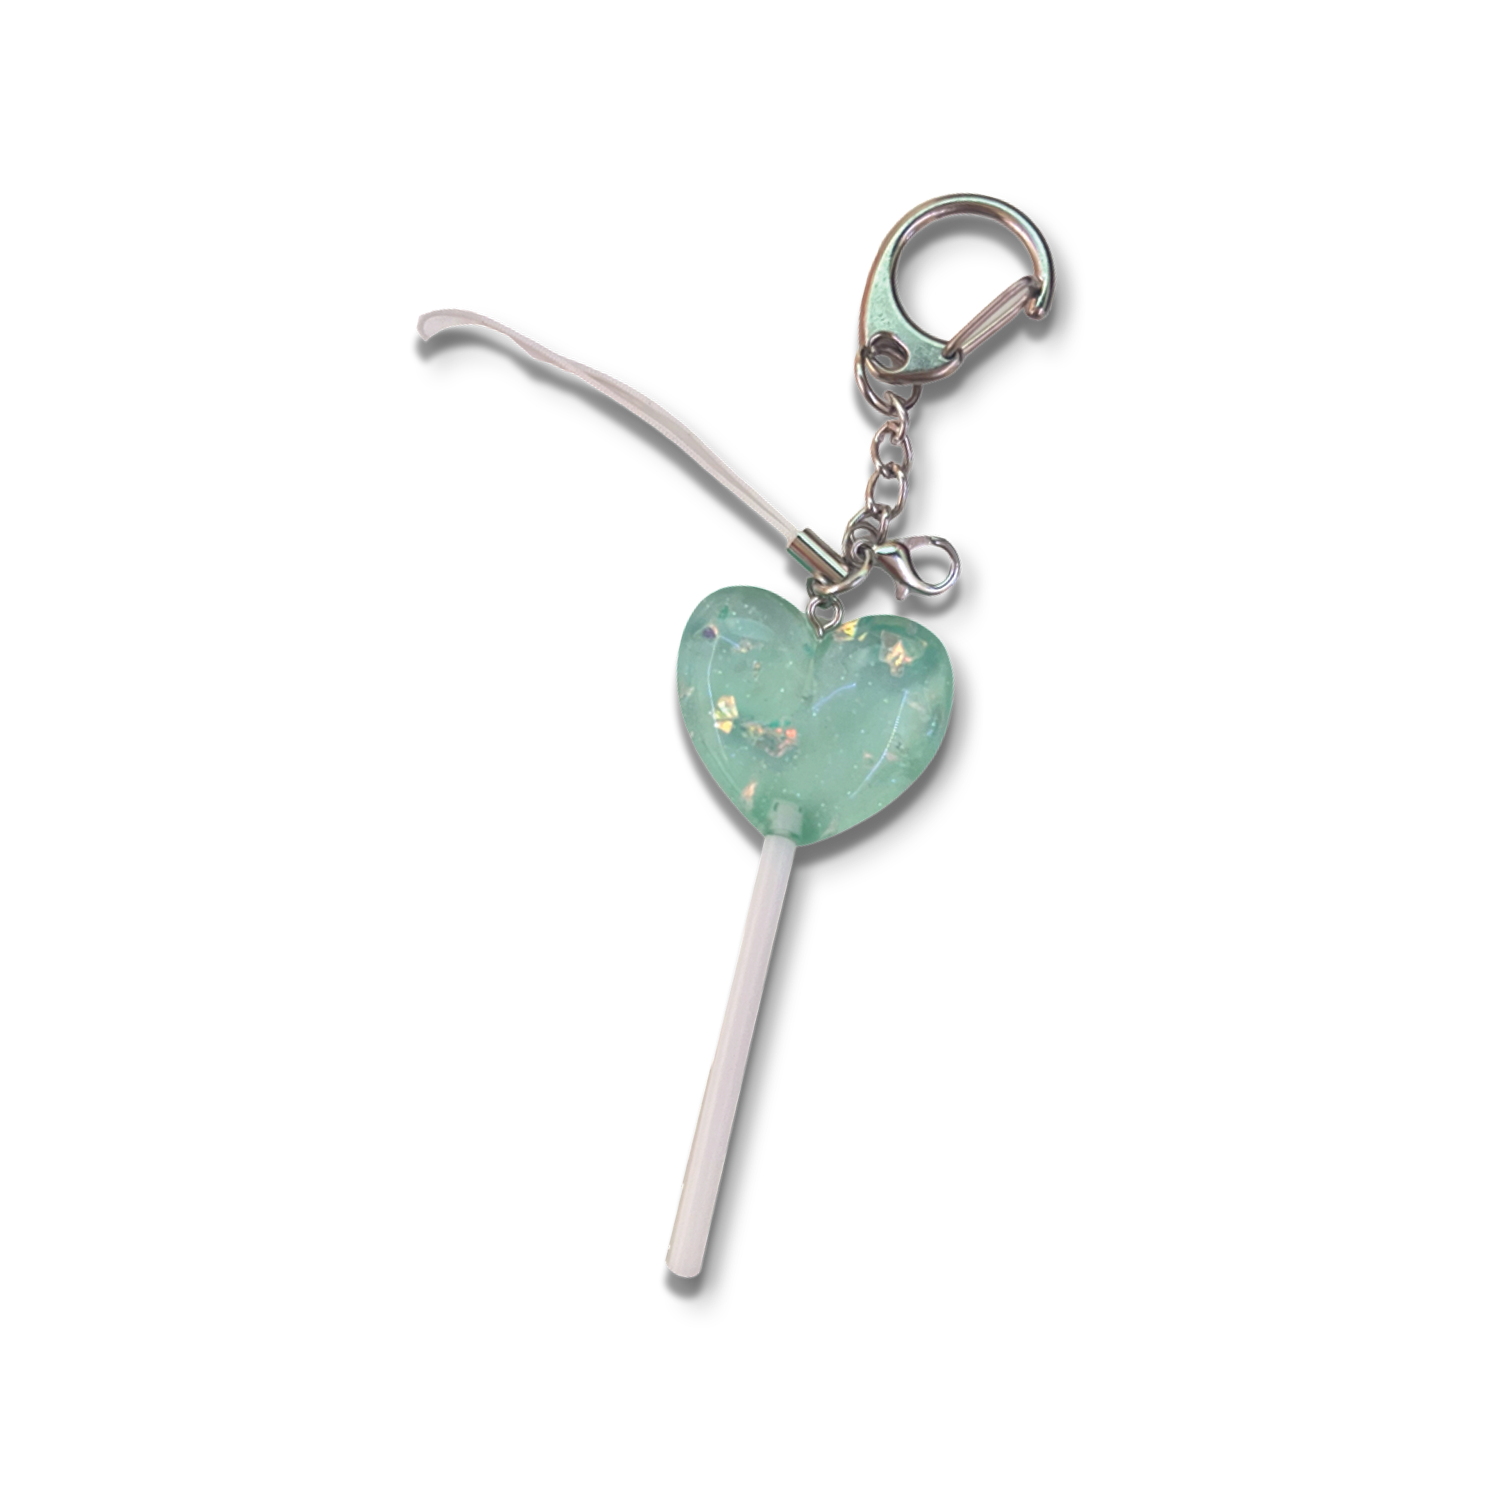 Big blue sparkly lollipop with keychain and basic white phone strap.